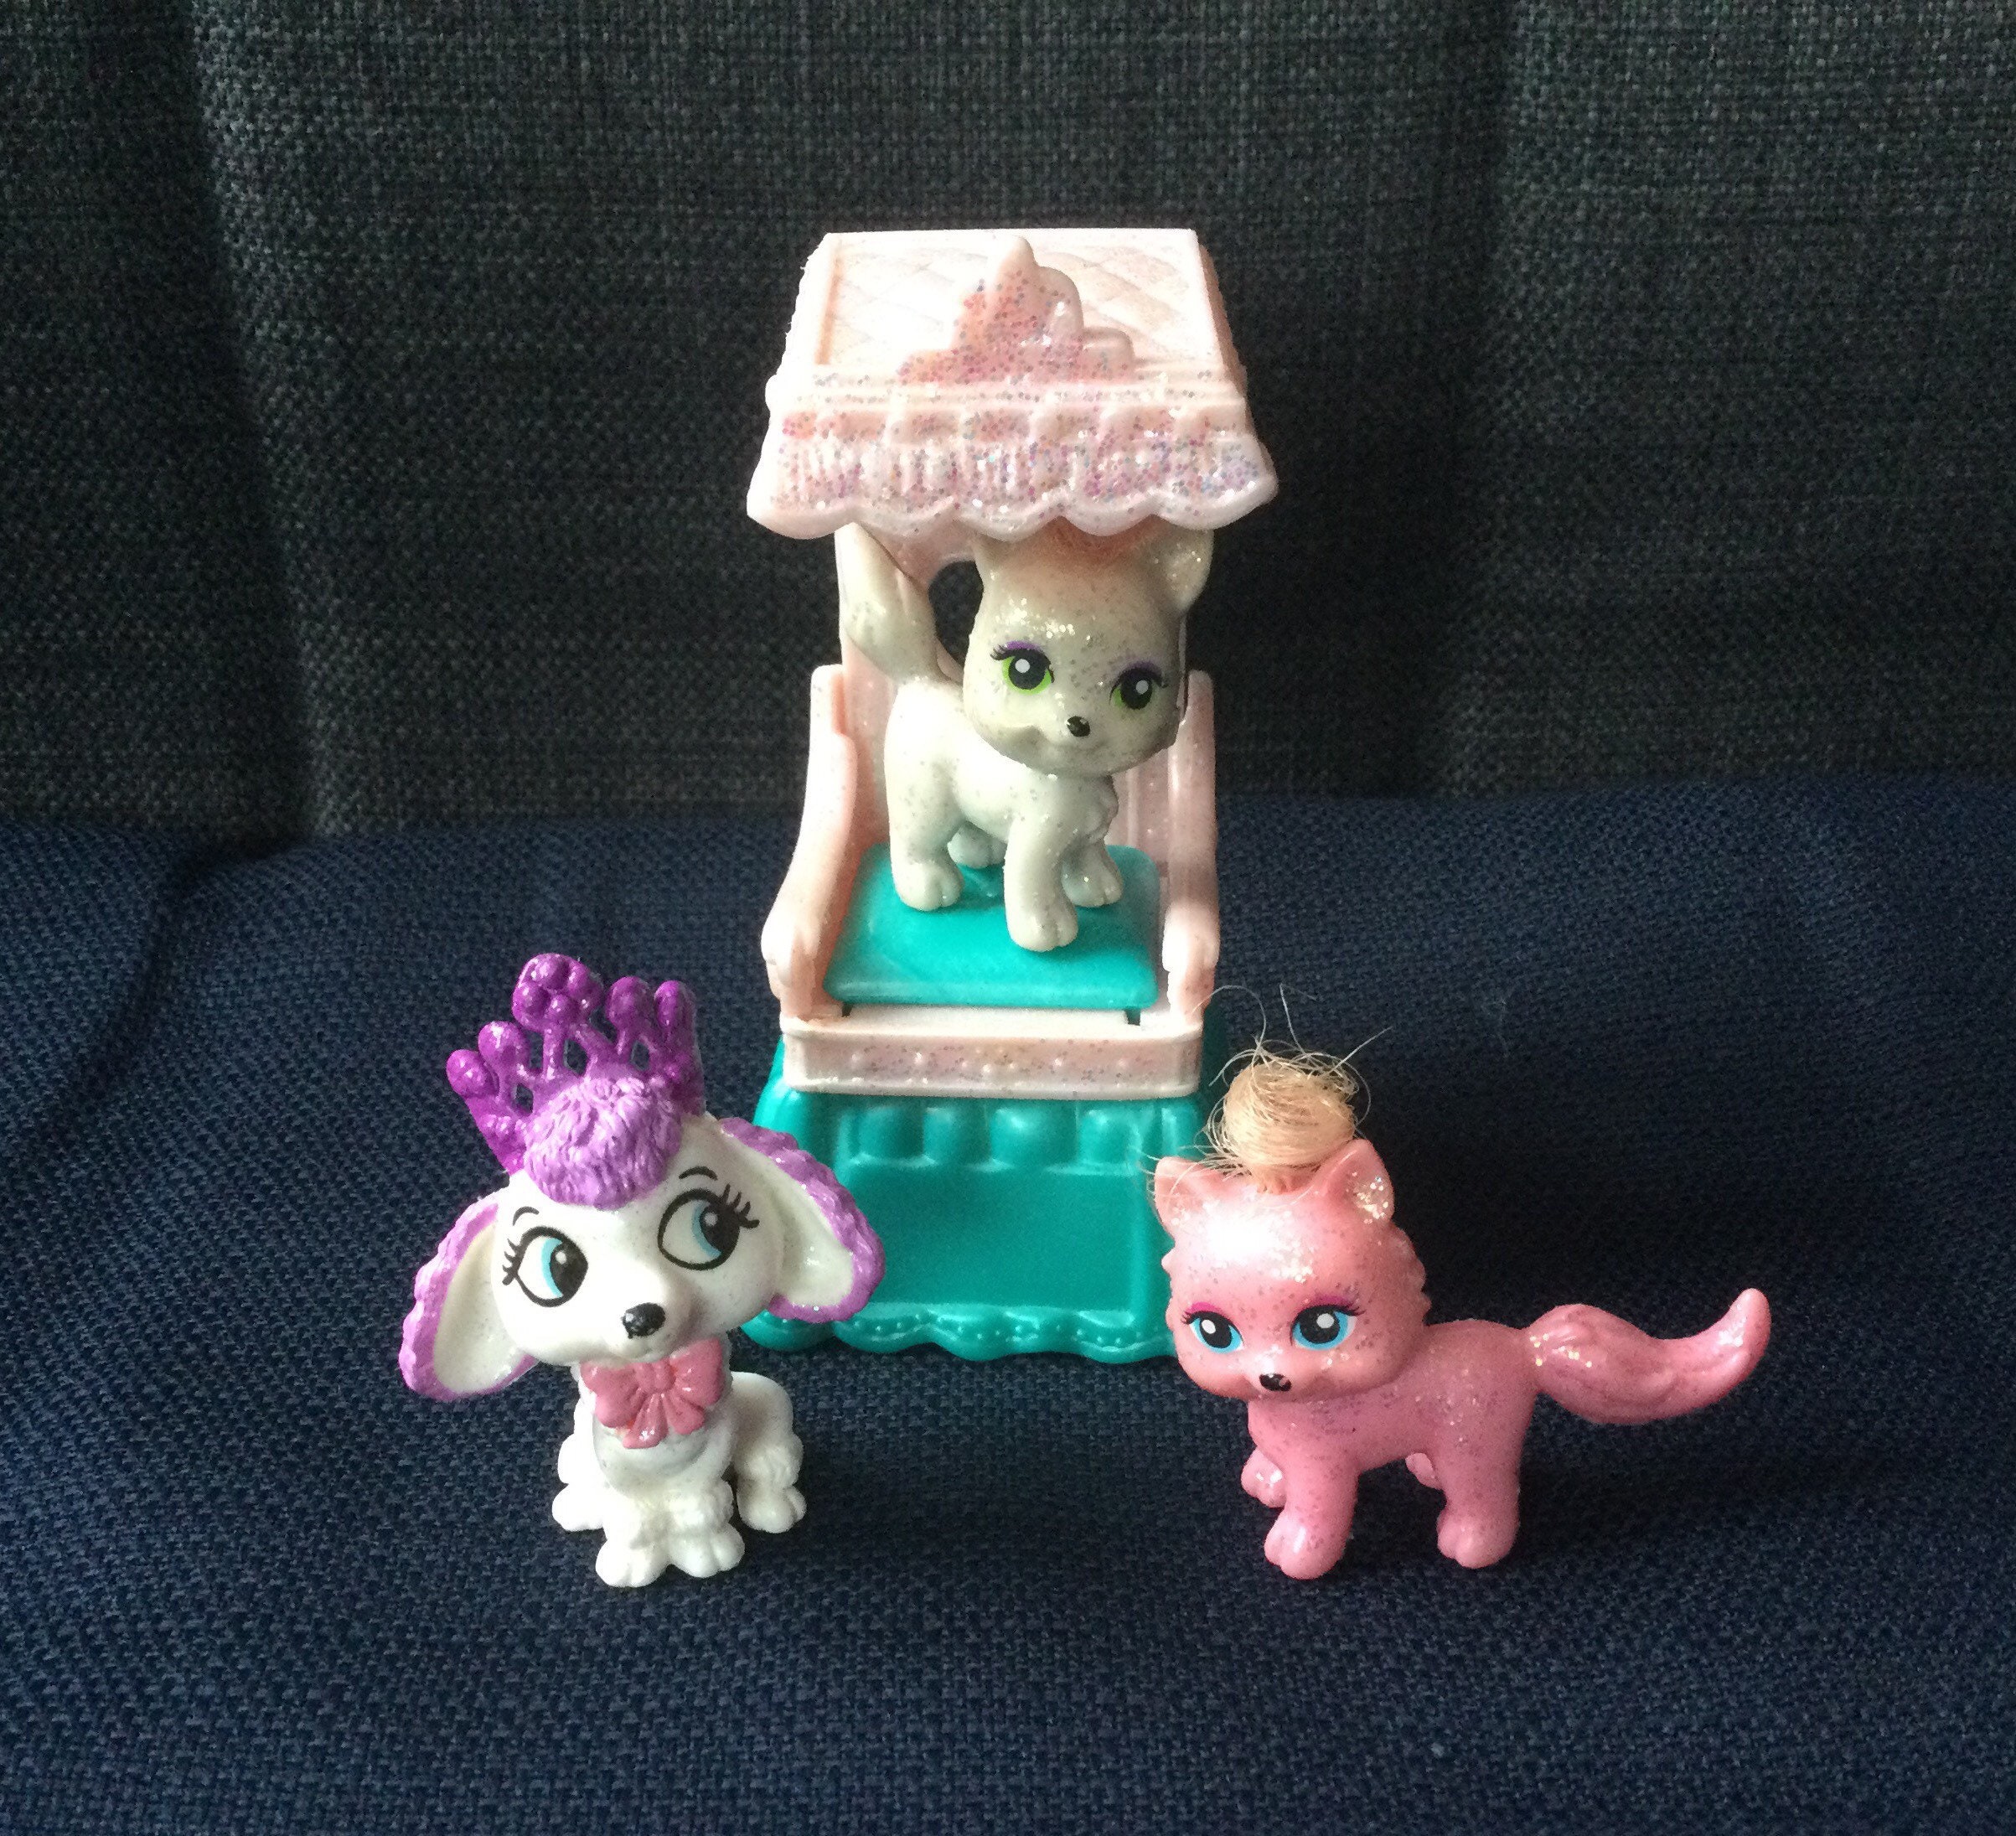 Littlest Pet Shop Pick a Pet 9 to Choose From. Crystal, Sparkle and More 